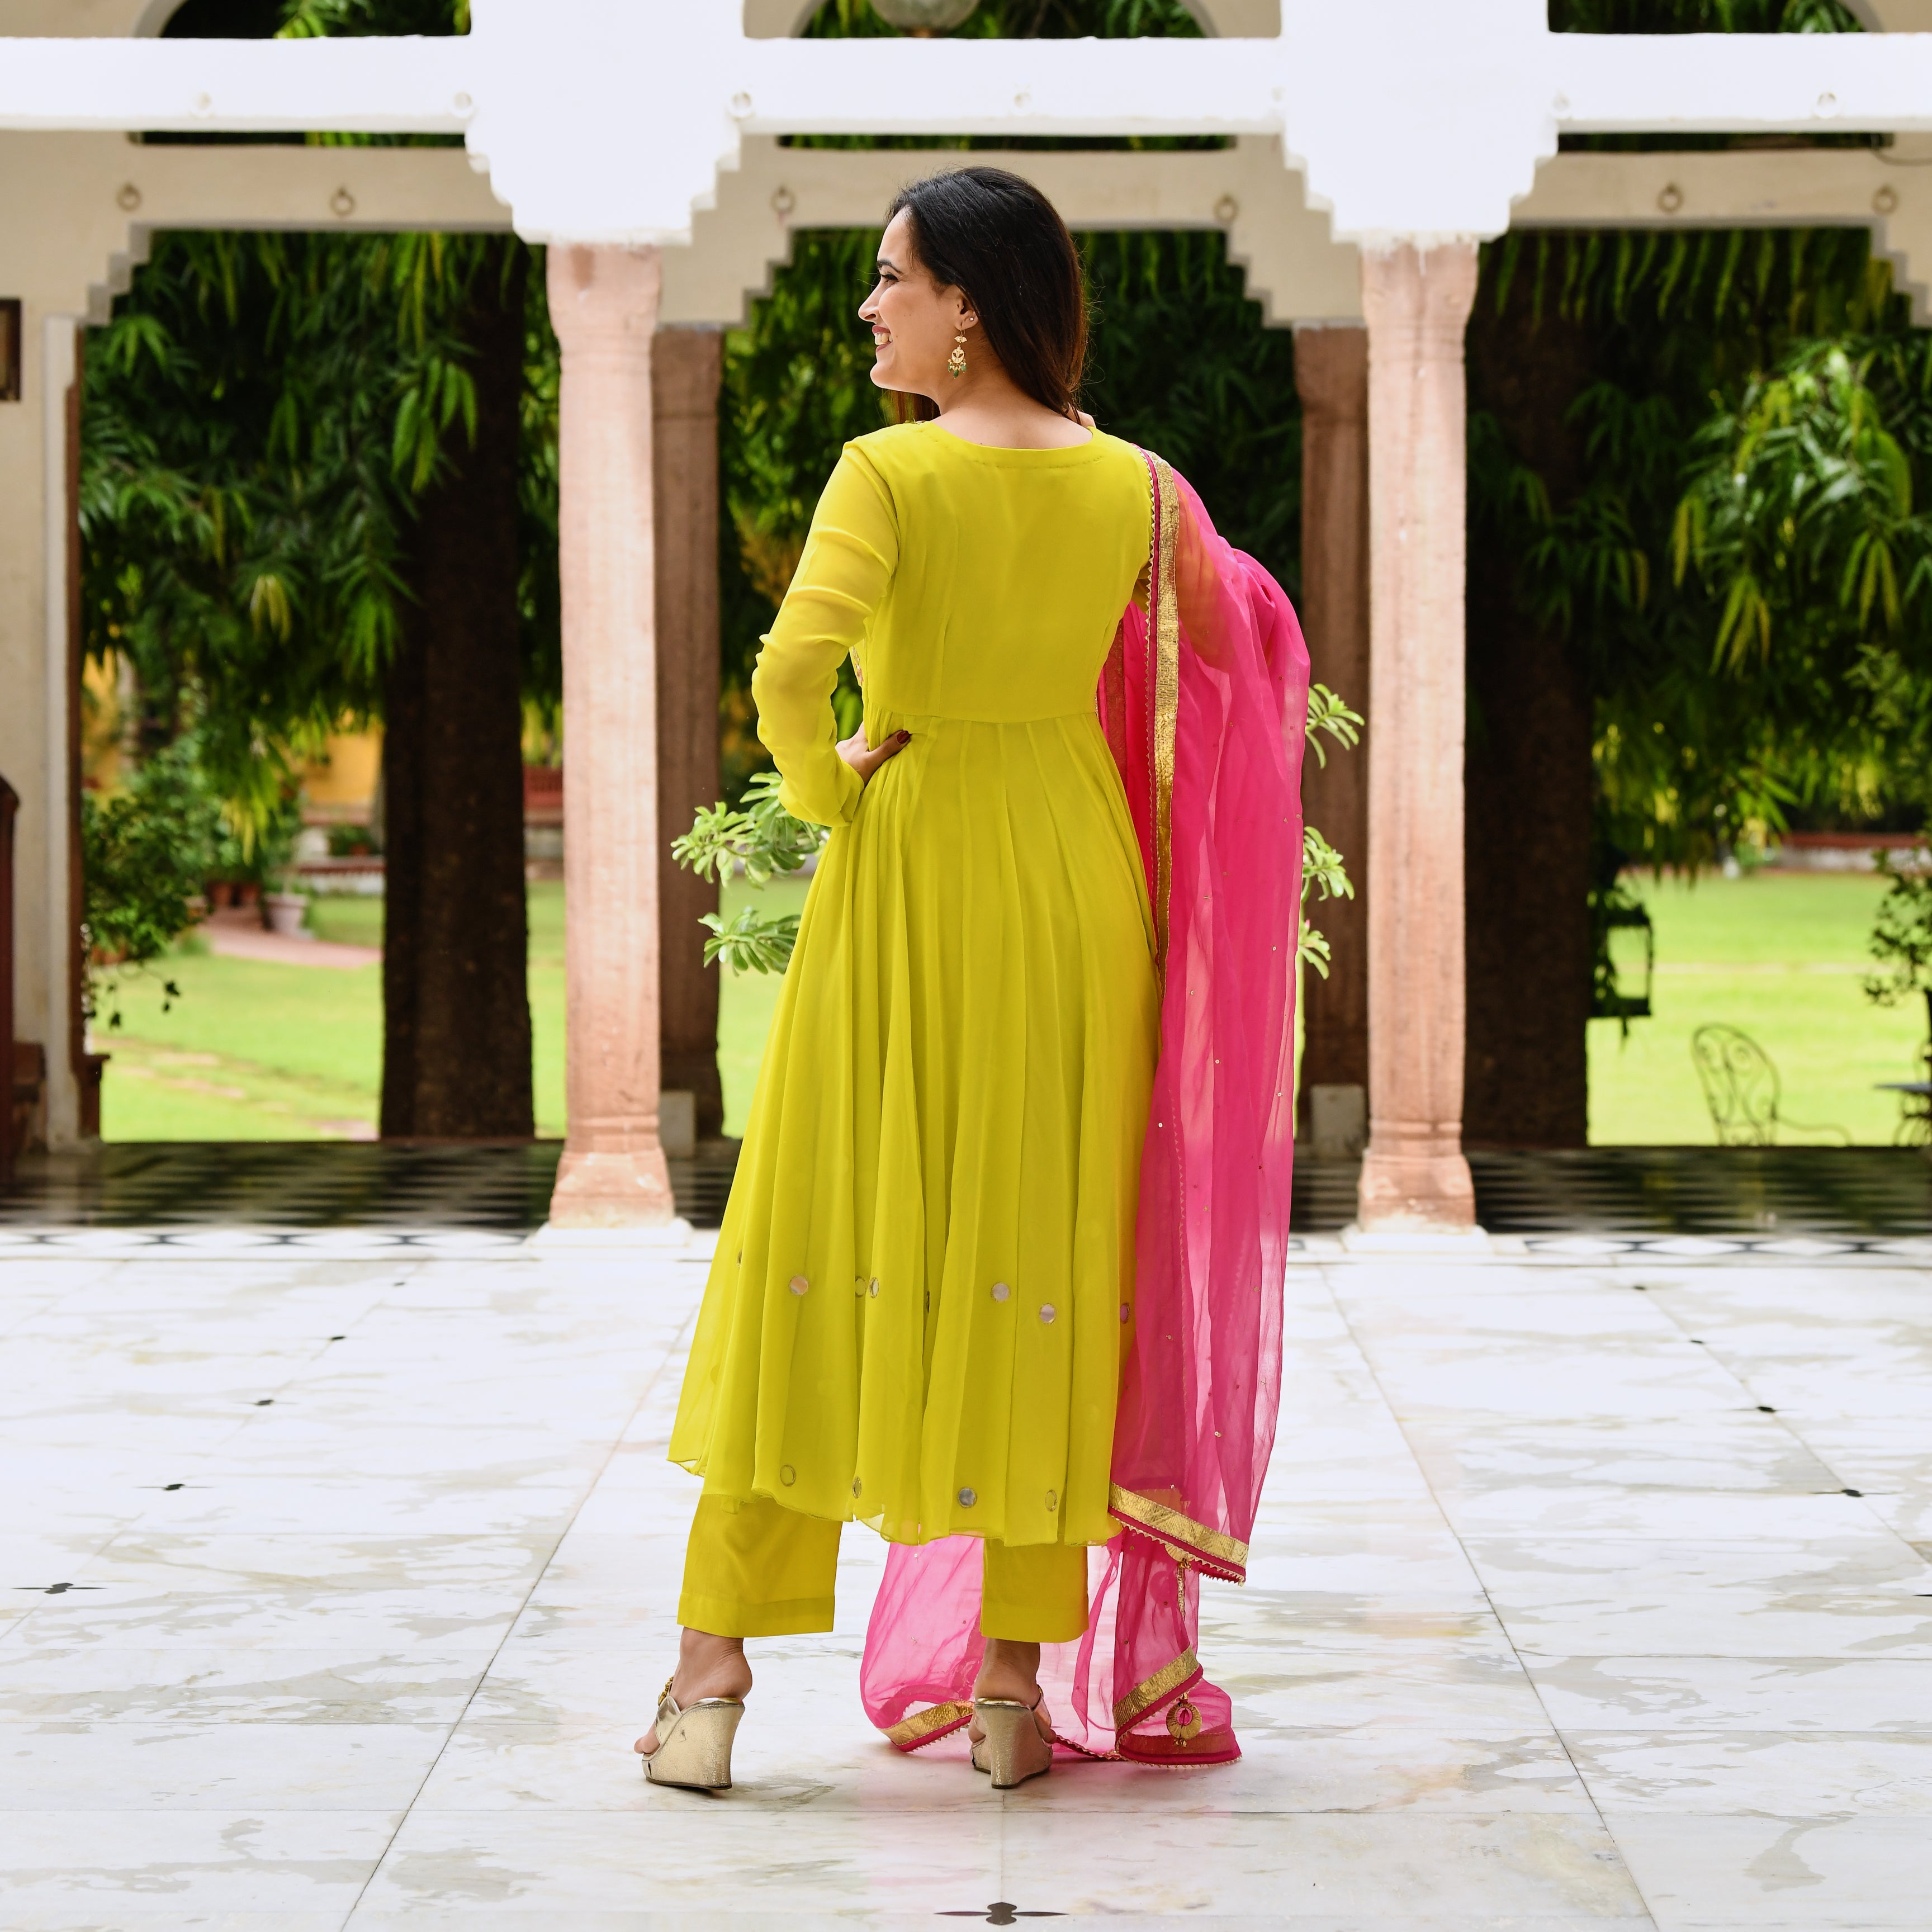 Patiala suit - Yellow and Pink - Beautiful combination Call us now on :  +918860484097, +919999176495, +9198710… | Patiala suit designs, Patiala suit,  Suit designs